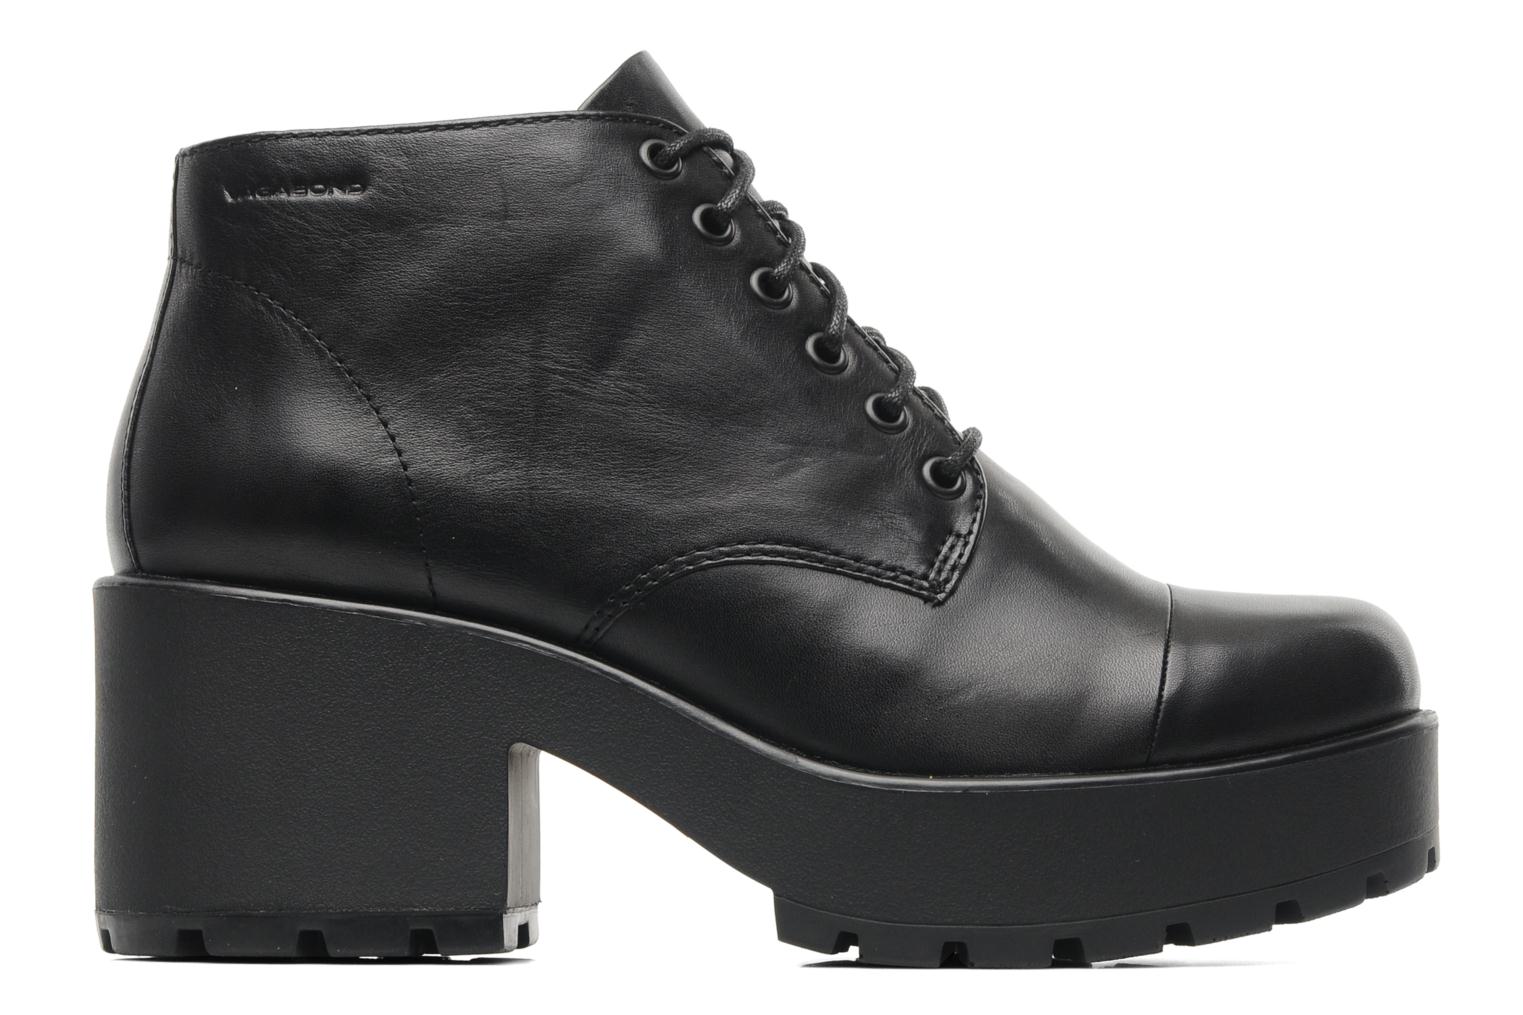 Vagabond Dioon 3747-001 Lace-up shoes in Black at Sarenza.co.uk (162265)